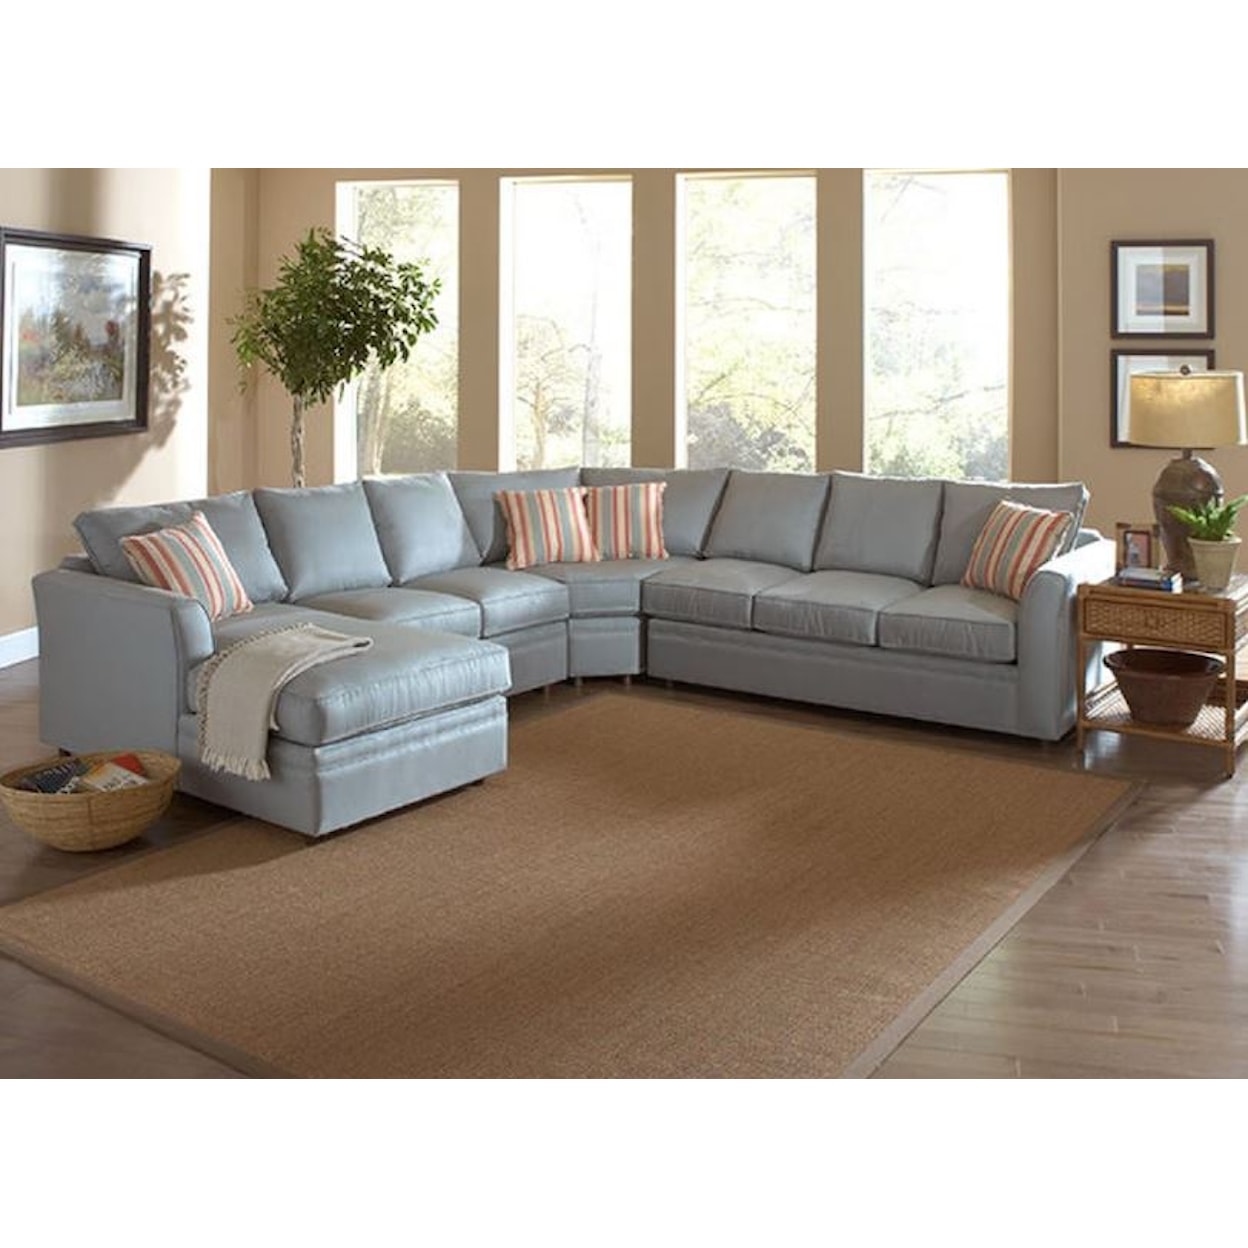 Braxton Culler Northfield Northfield Four-Piece Chaise Sectional